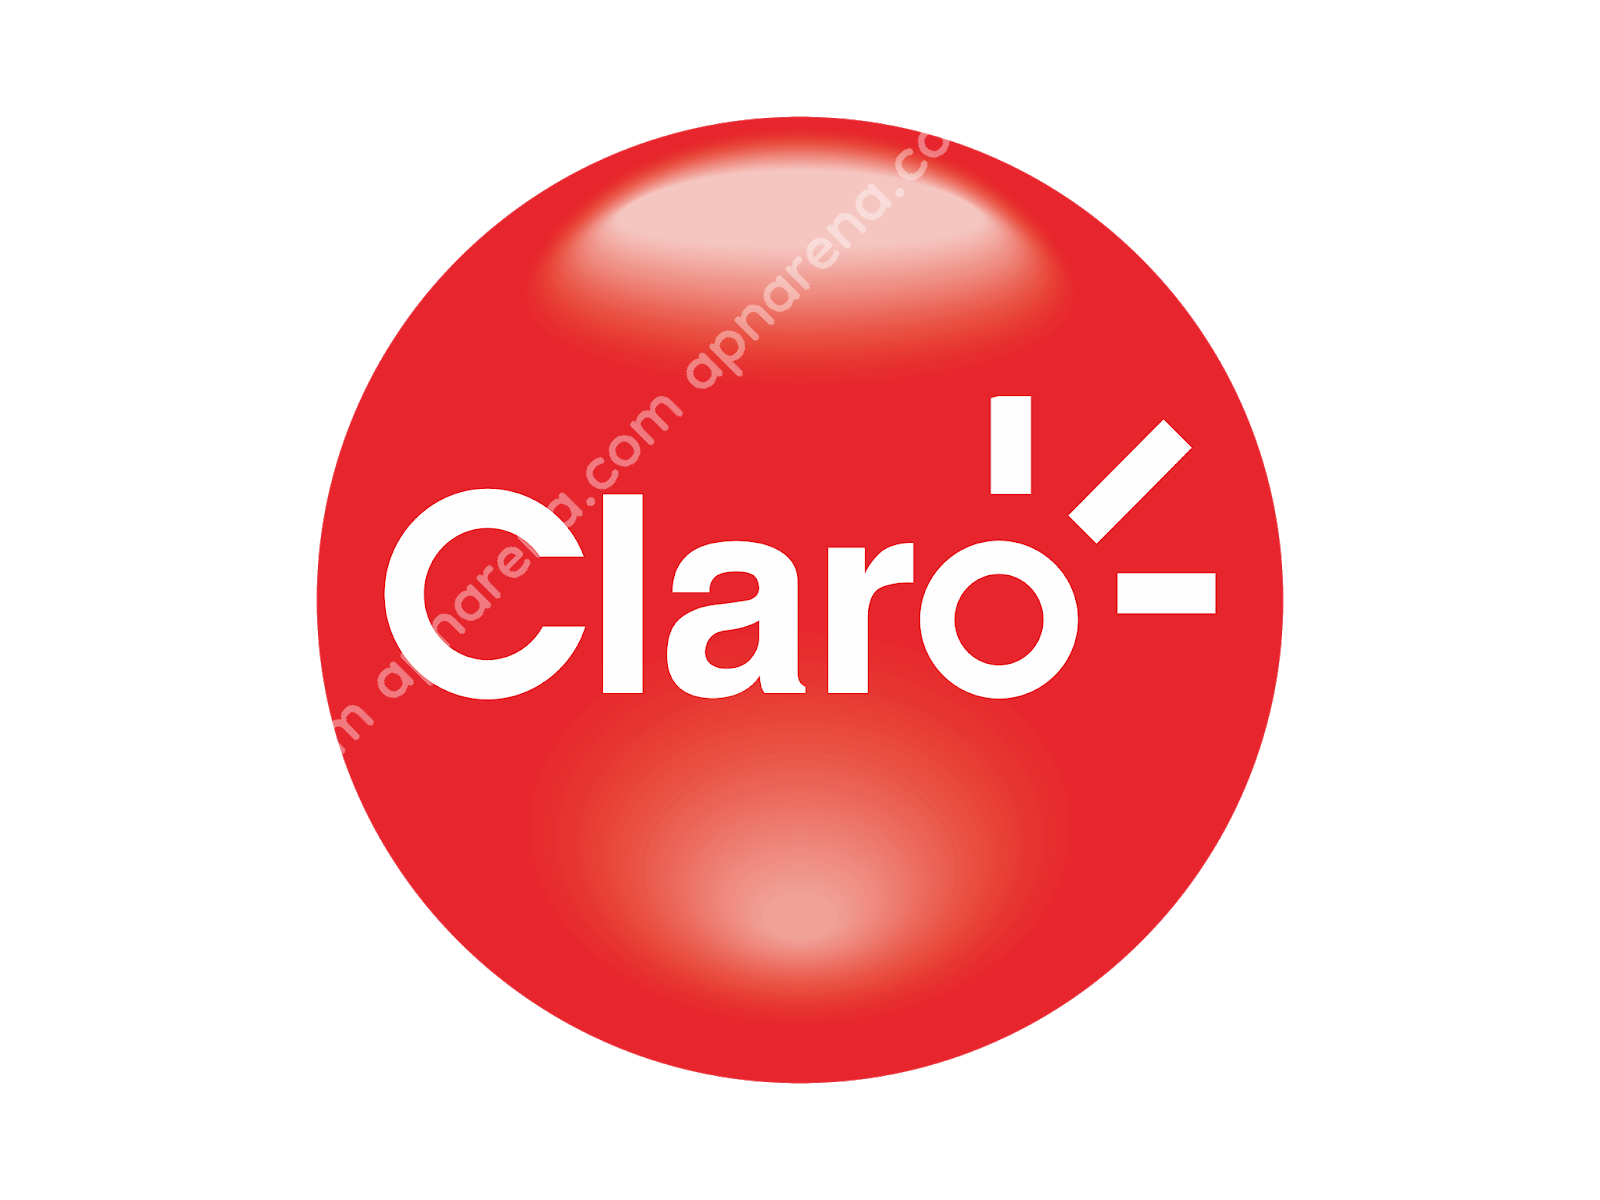 Claro (Claro nxt) APN Settings for Android and iPhone 2023